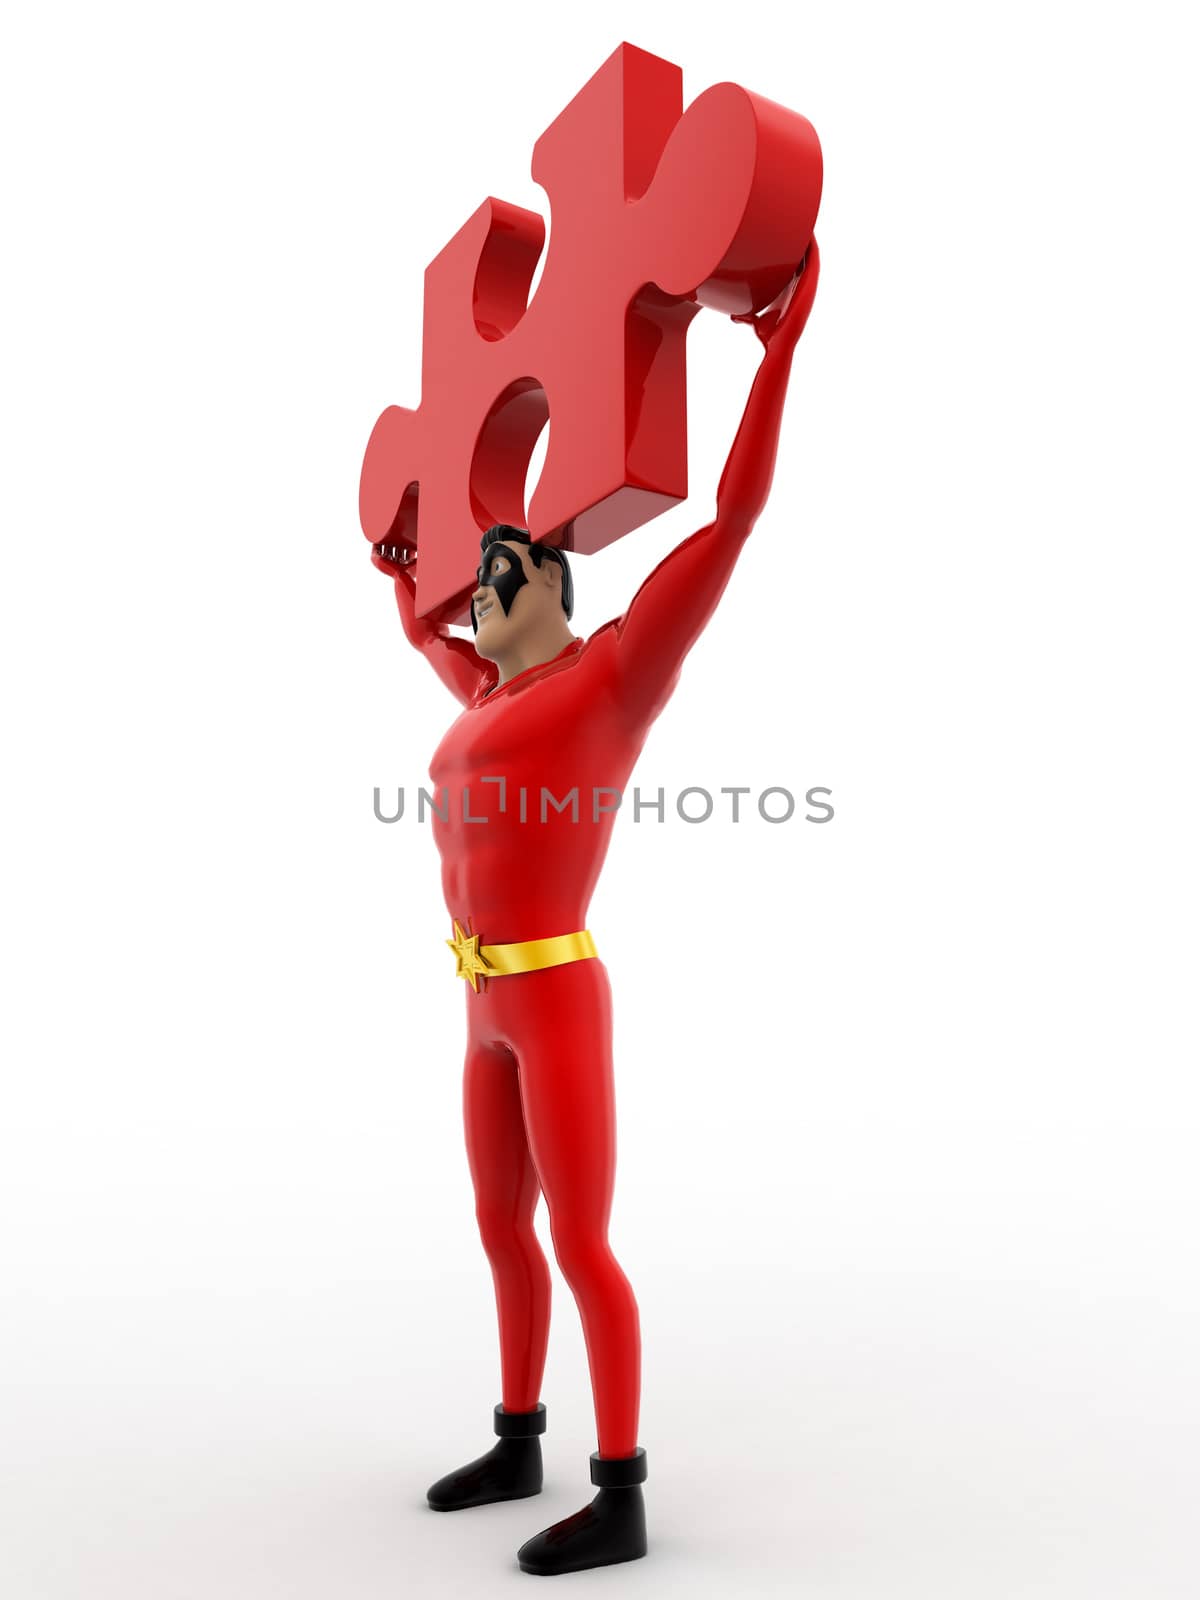 3d superhero holding red jigsaw puzzle piece in hand concept on white background, side angle view